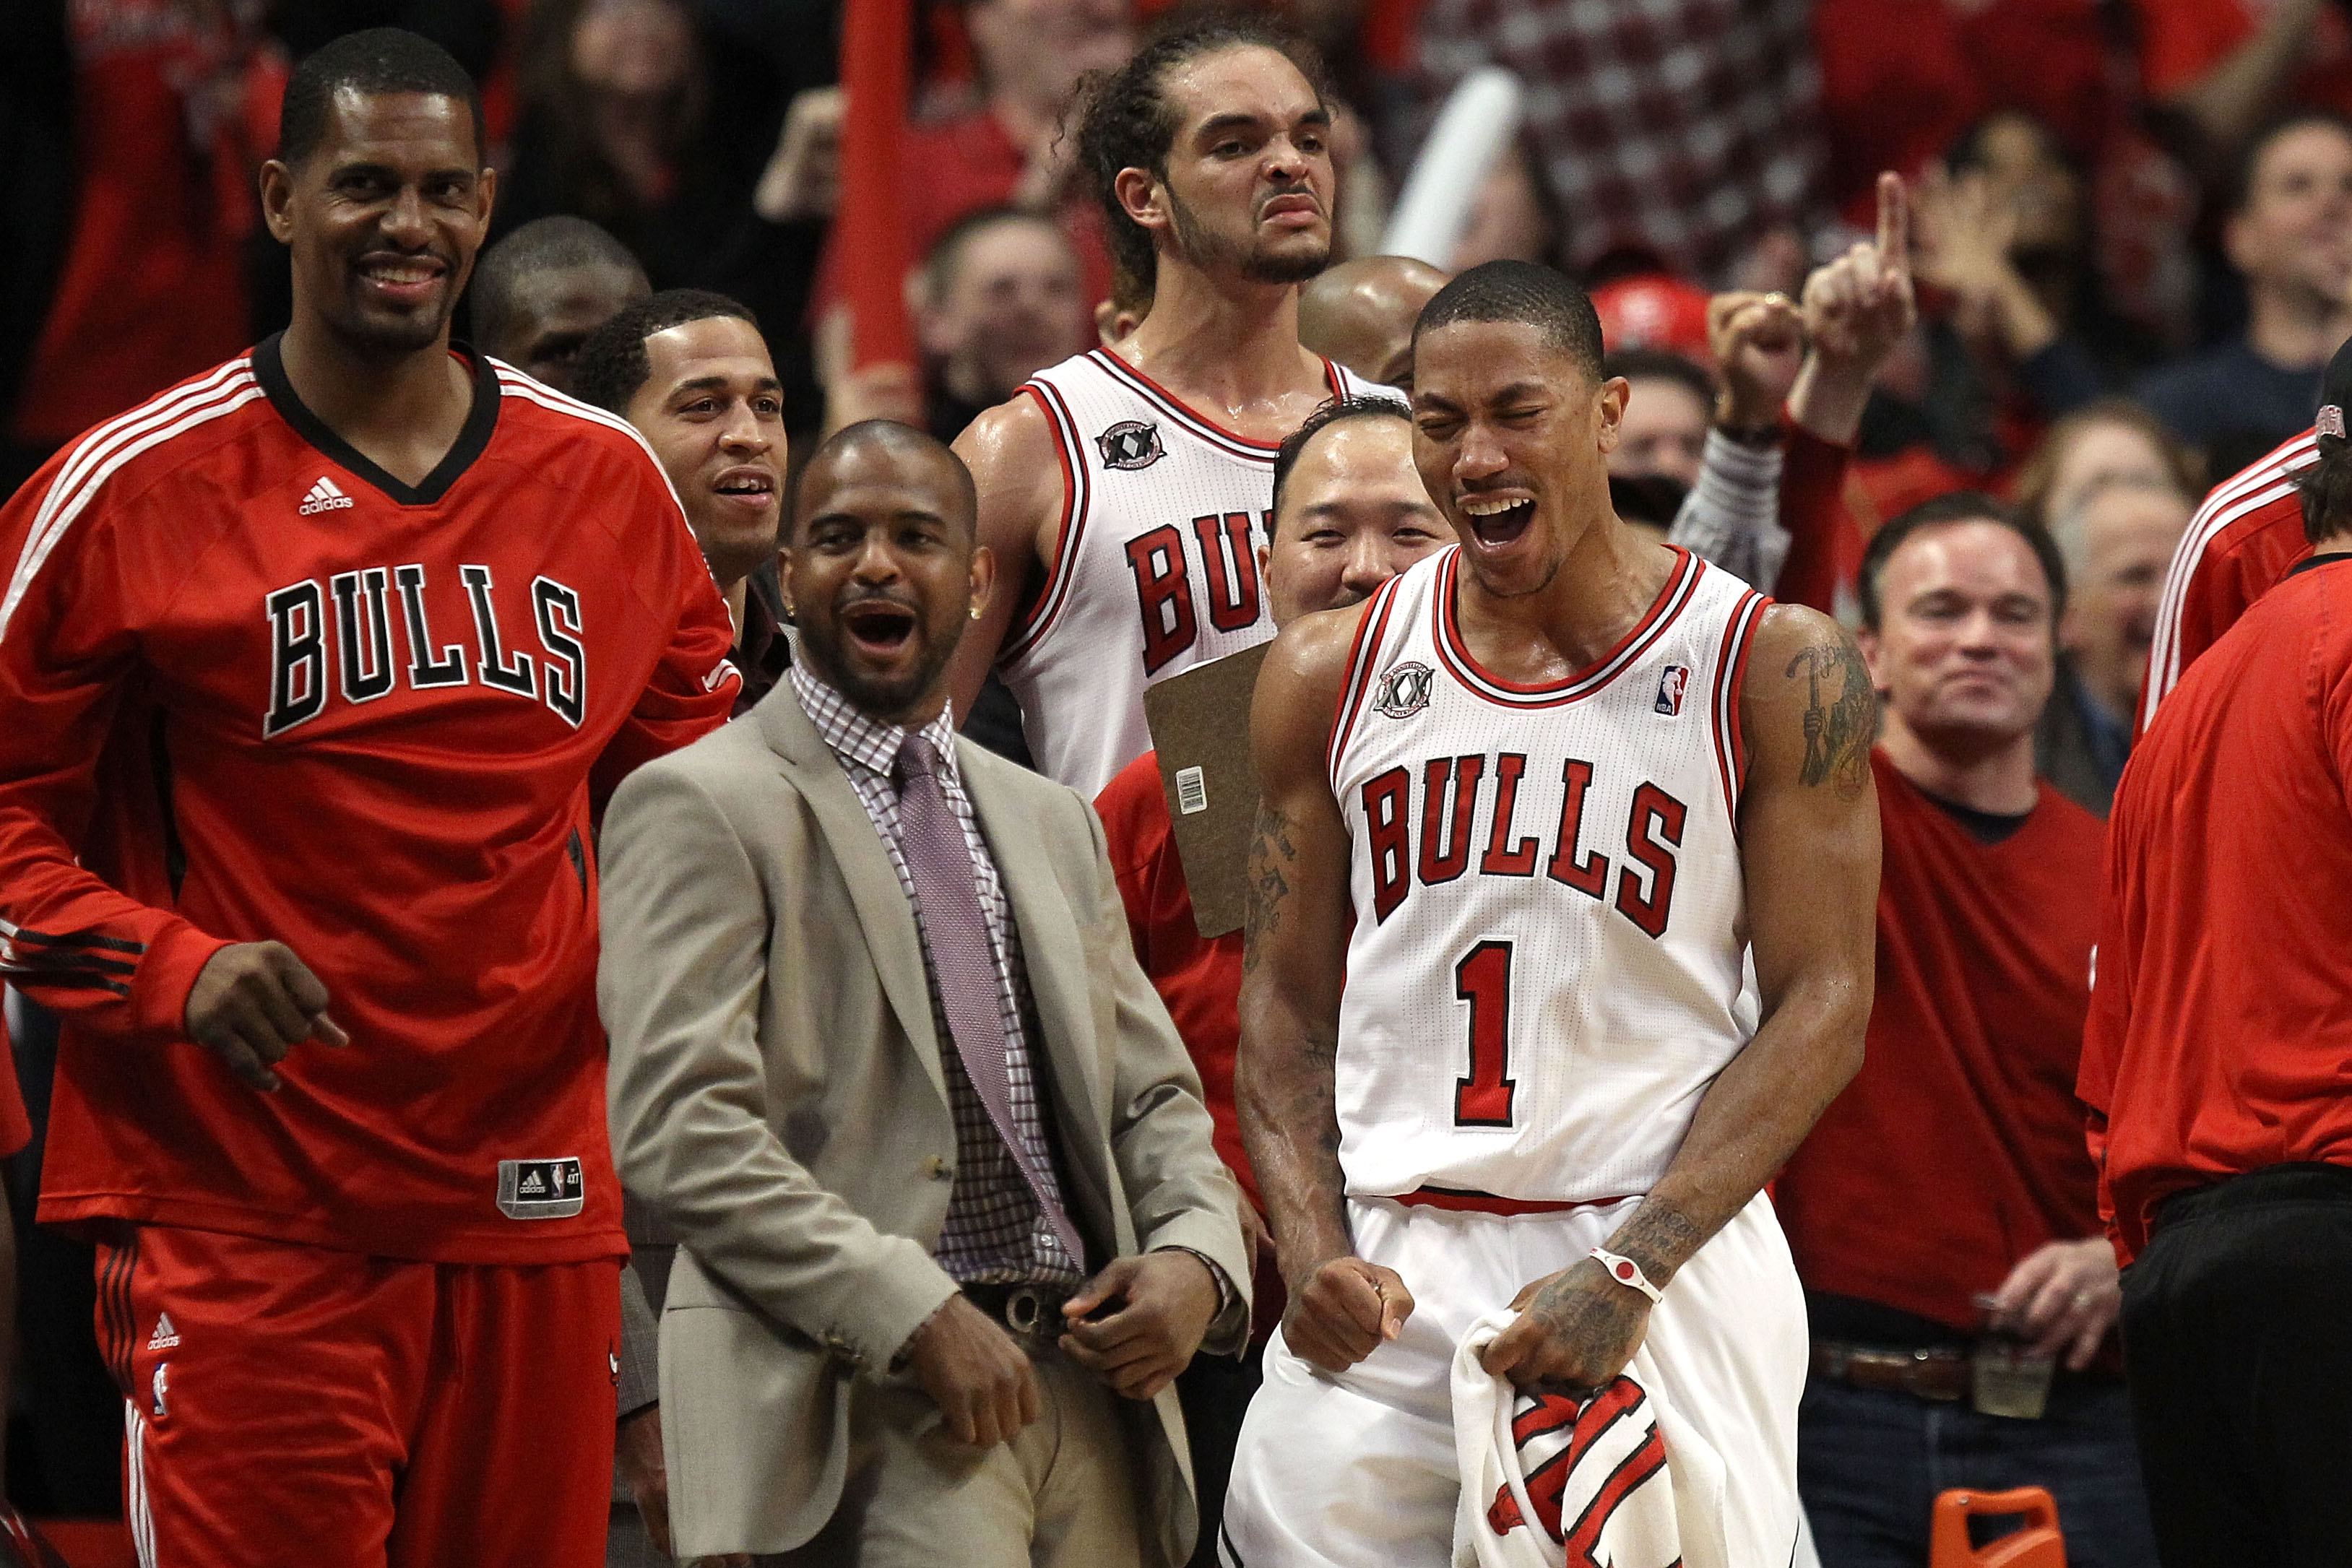 Not long ago, Rose and Noah seemed destined for Bulls history